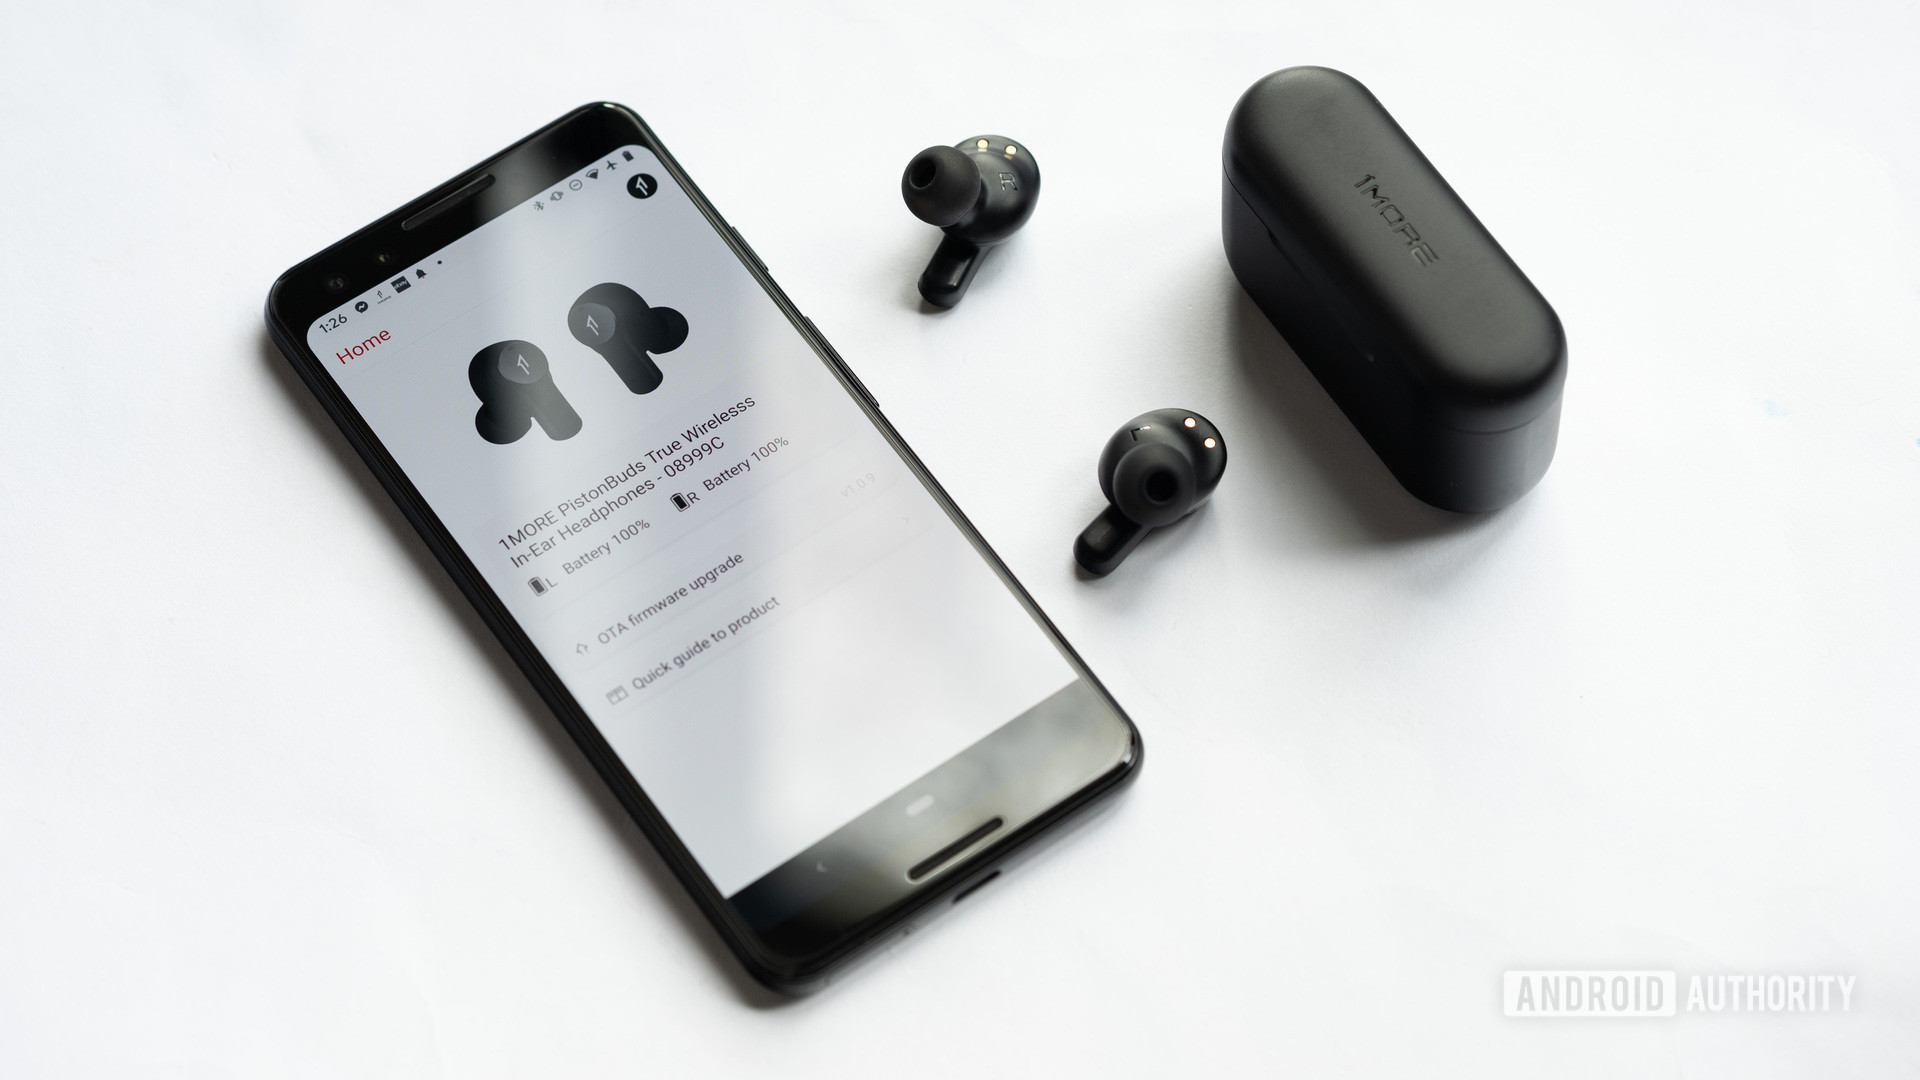 The 1MORE PistonBuds cheap true wireless earbuds outside of the closed charging case, and next to a Google Pixel 3 smartphone with the 1MORE Music app open.